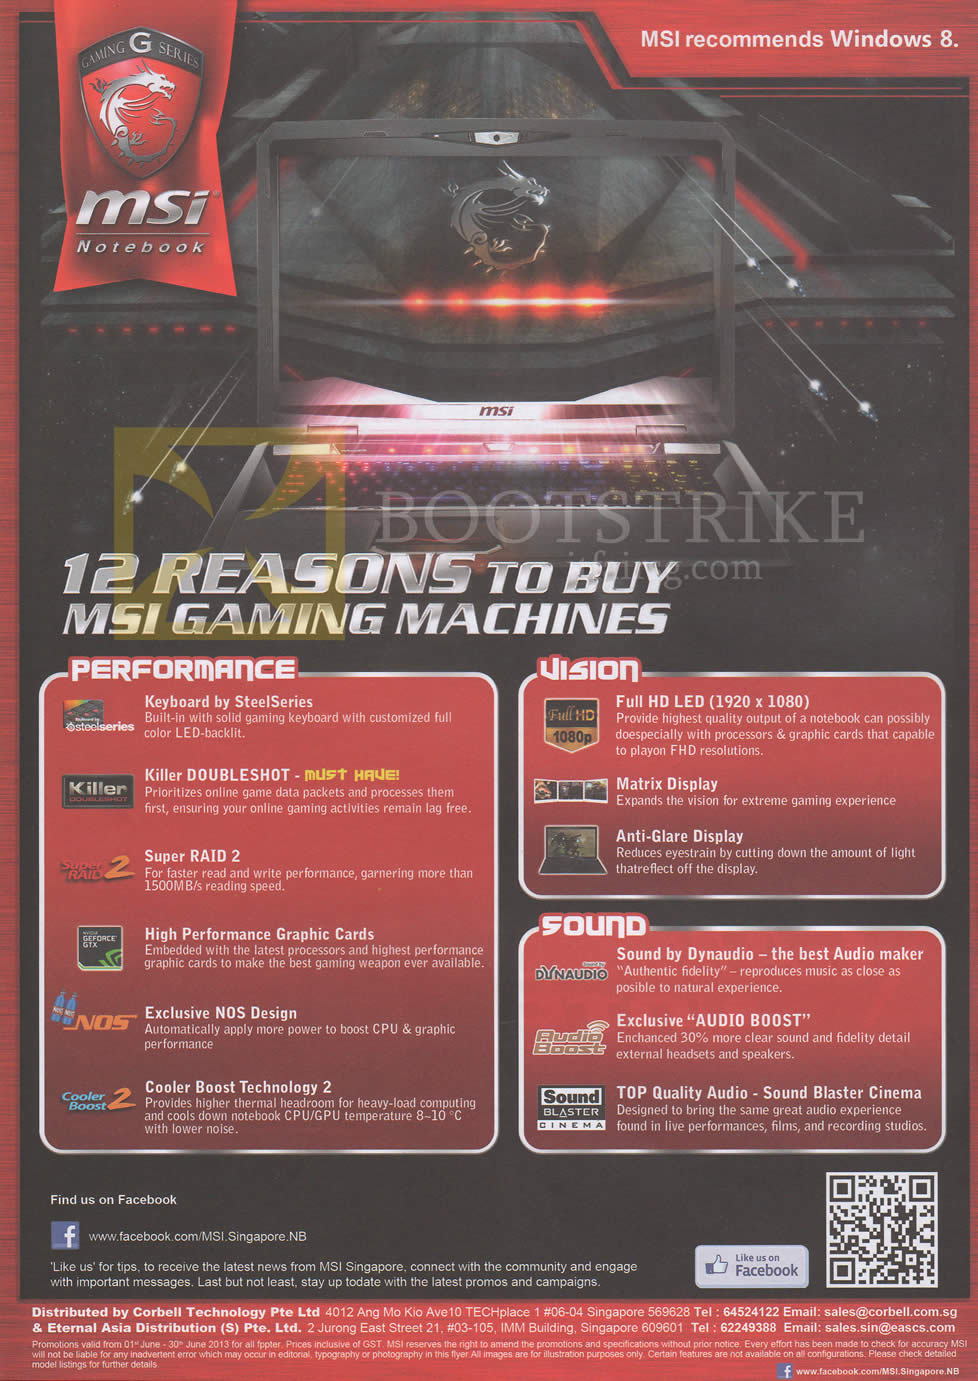 PC SHOW 2013 price list image brochure of MSI Notebooks 12 Reasons To Buy MSI Gaming Machines, Performance, Vision, Sound